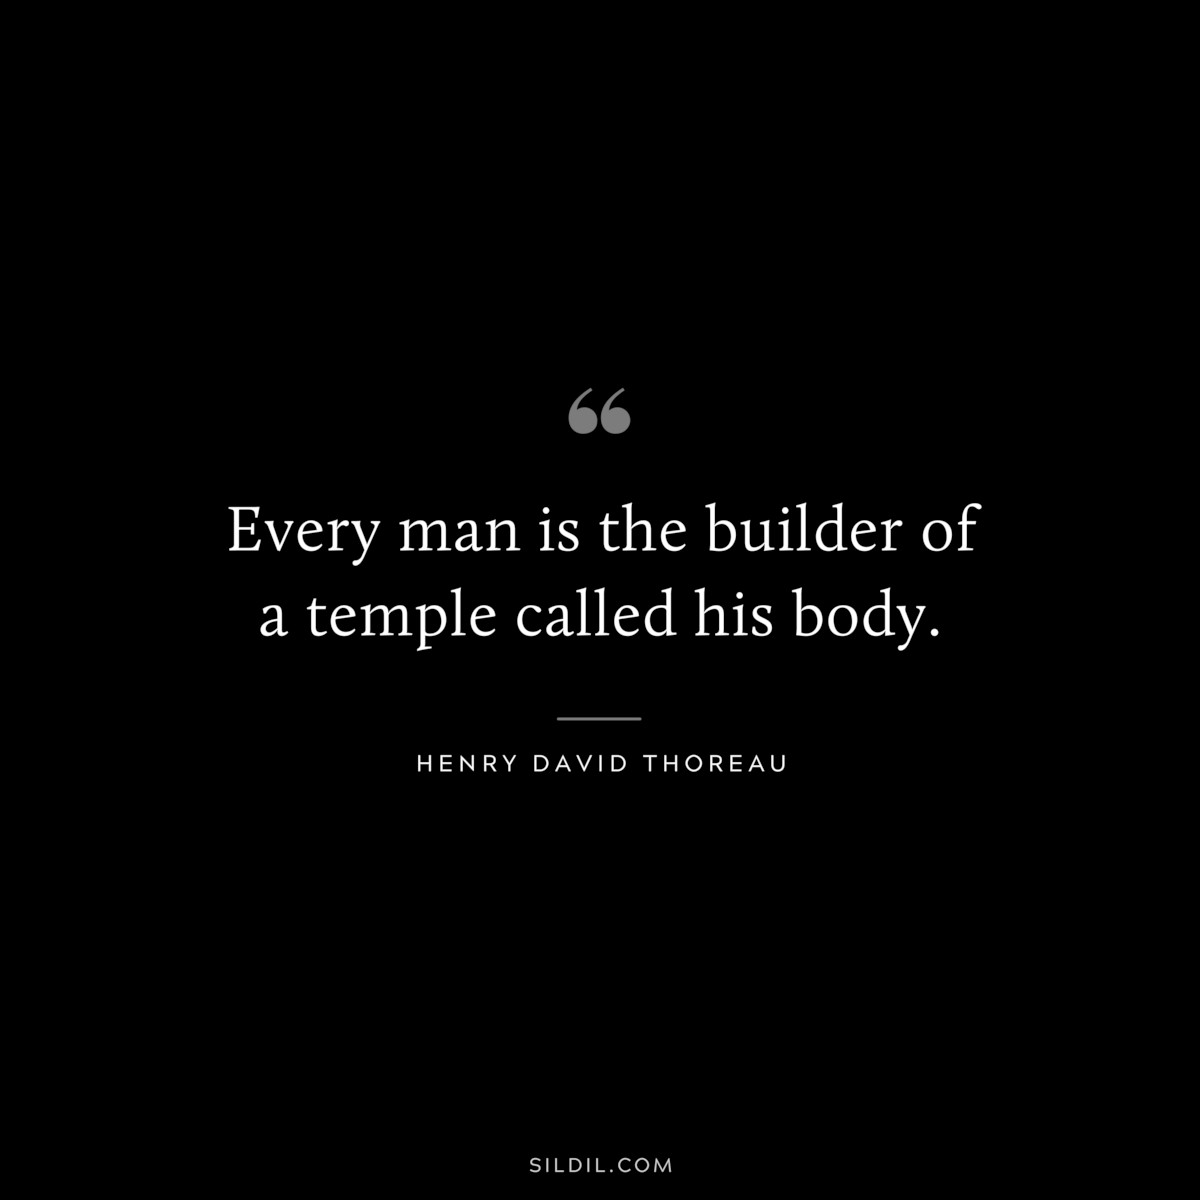 Every man is the builder of a temple called his body. — Henry David Thoreau